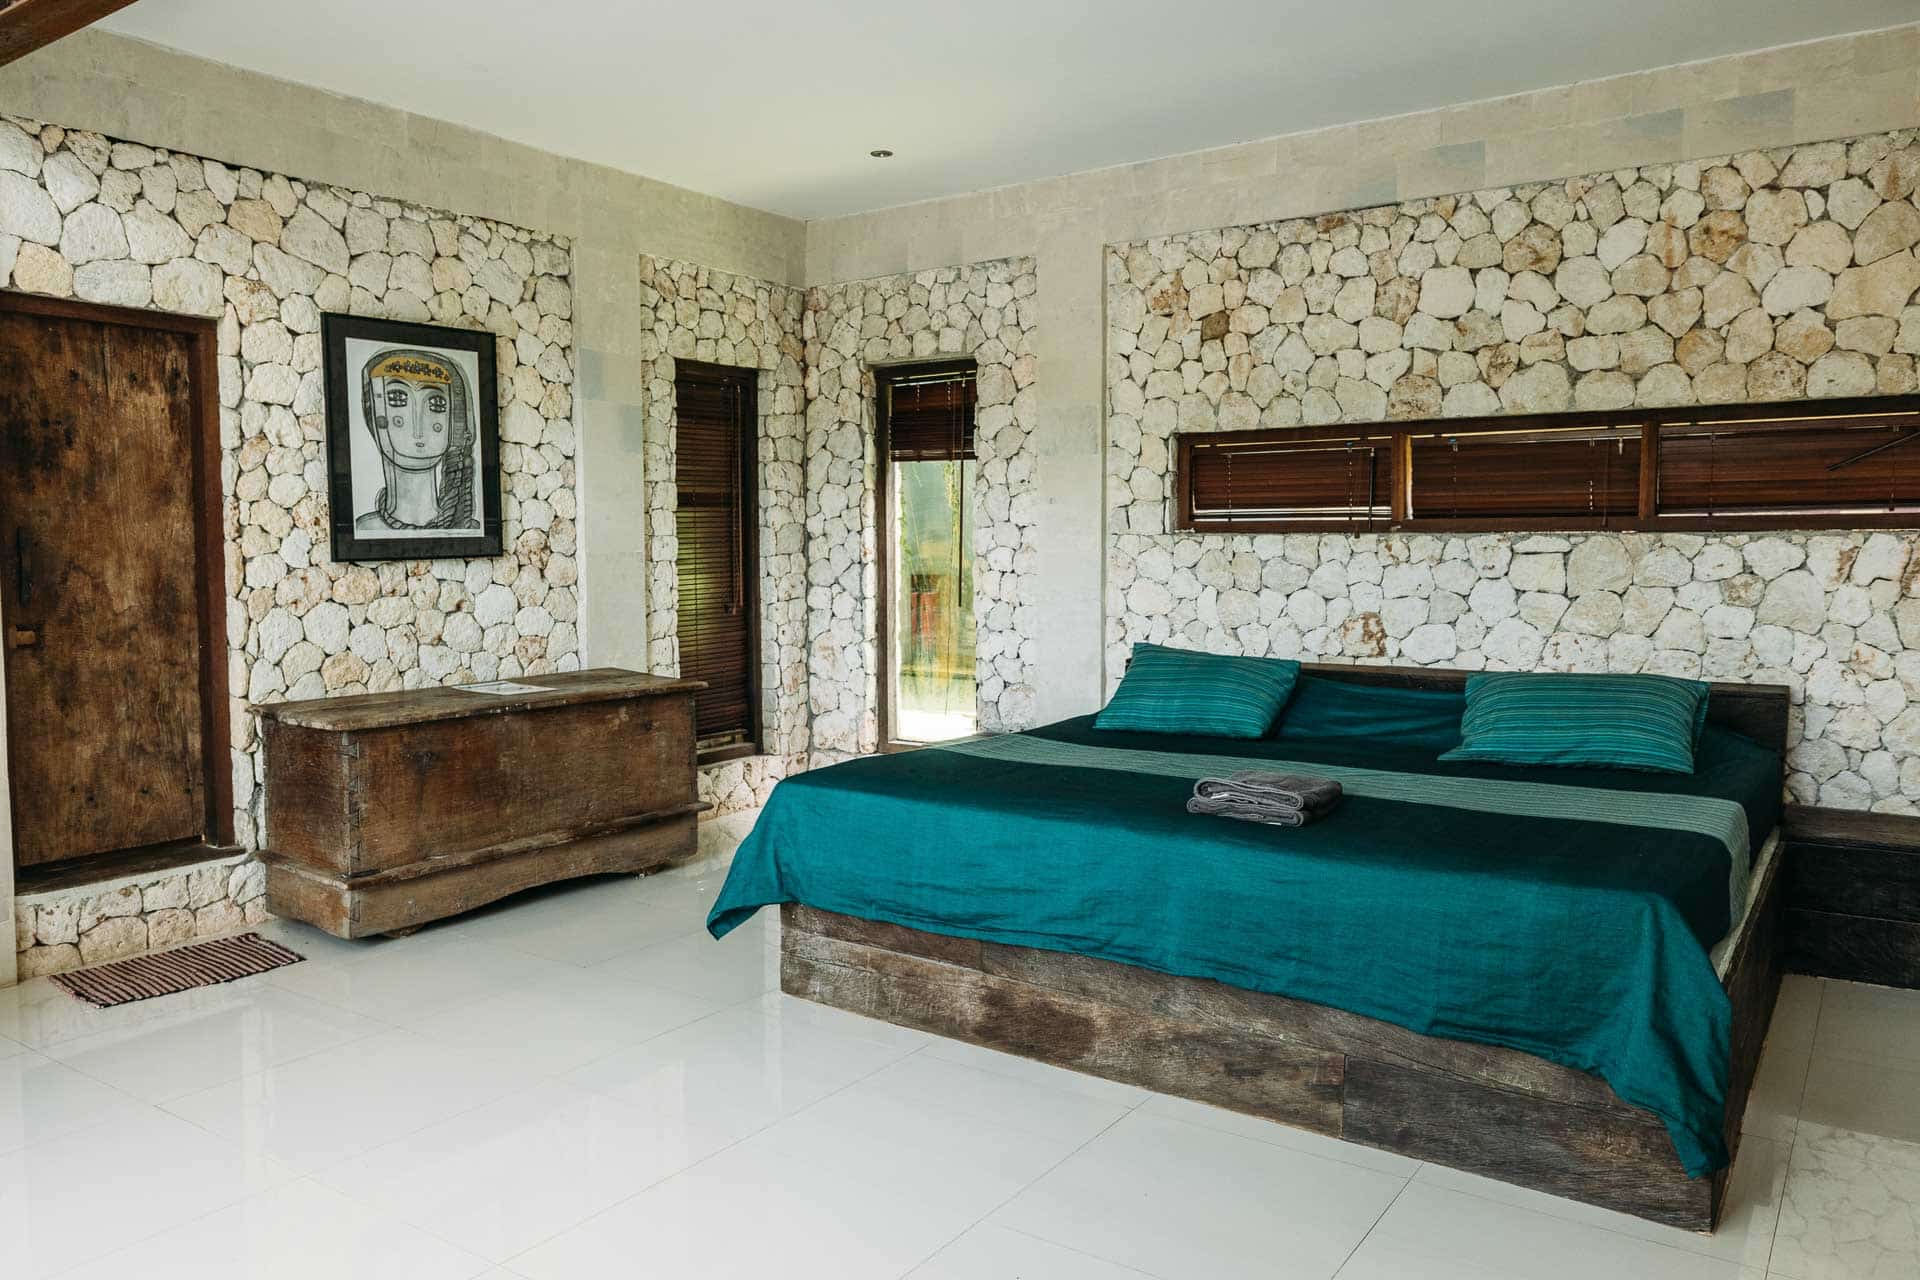 A room in hotel with stones for walls and a king-size bed with rustic decor